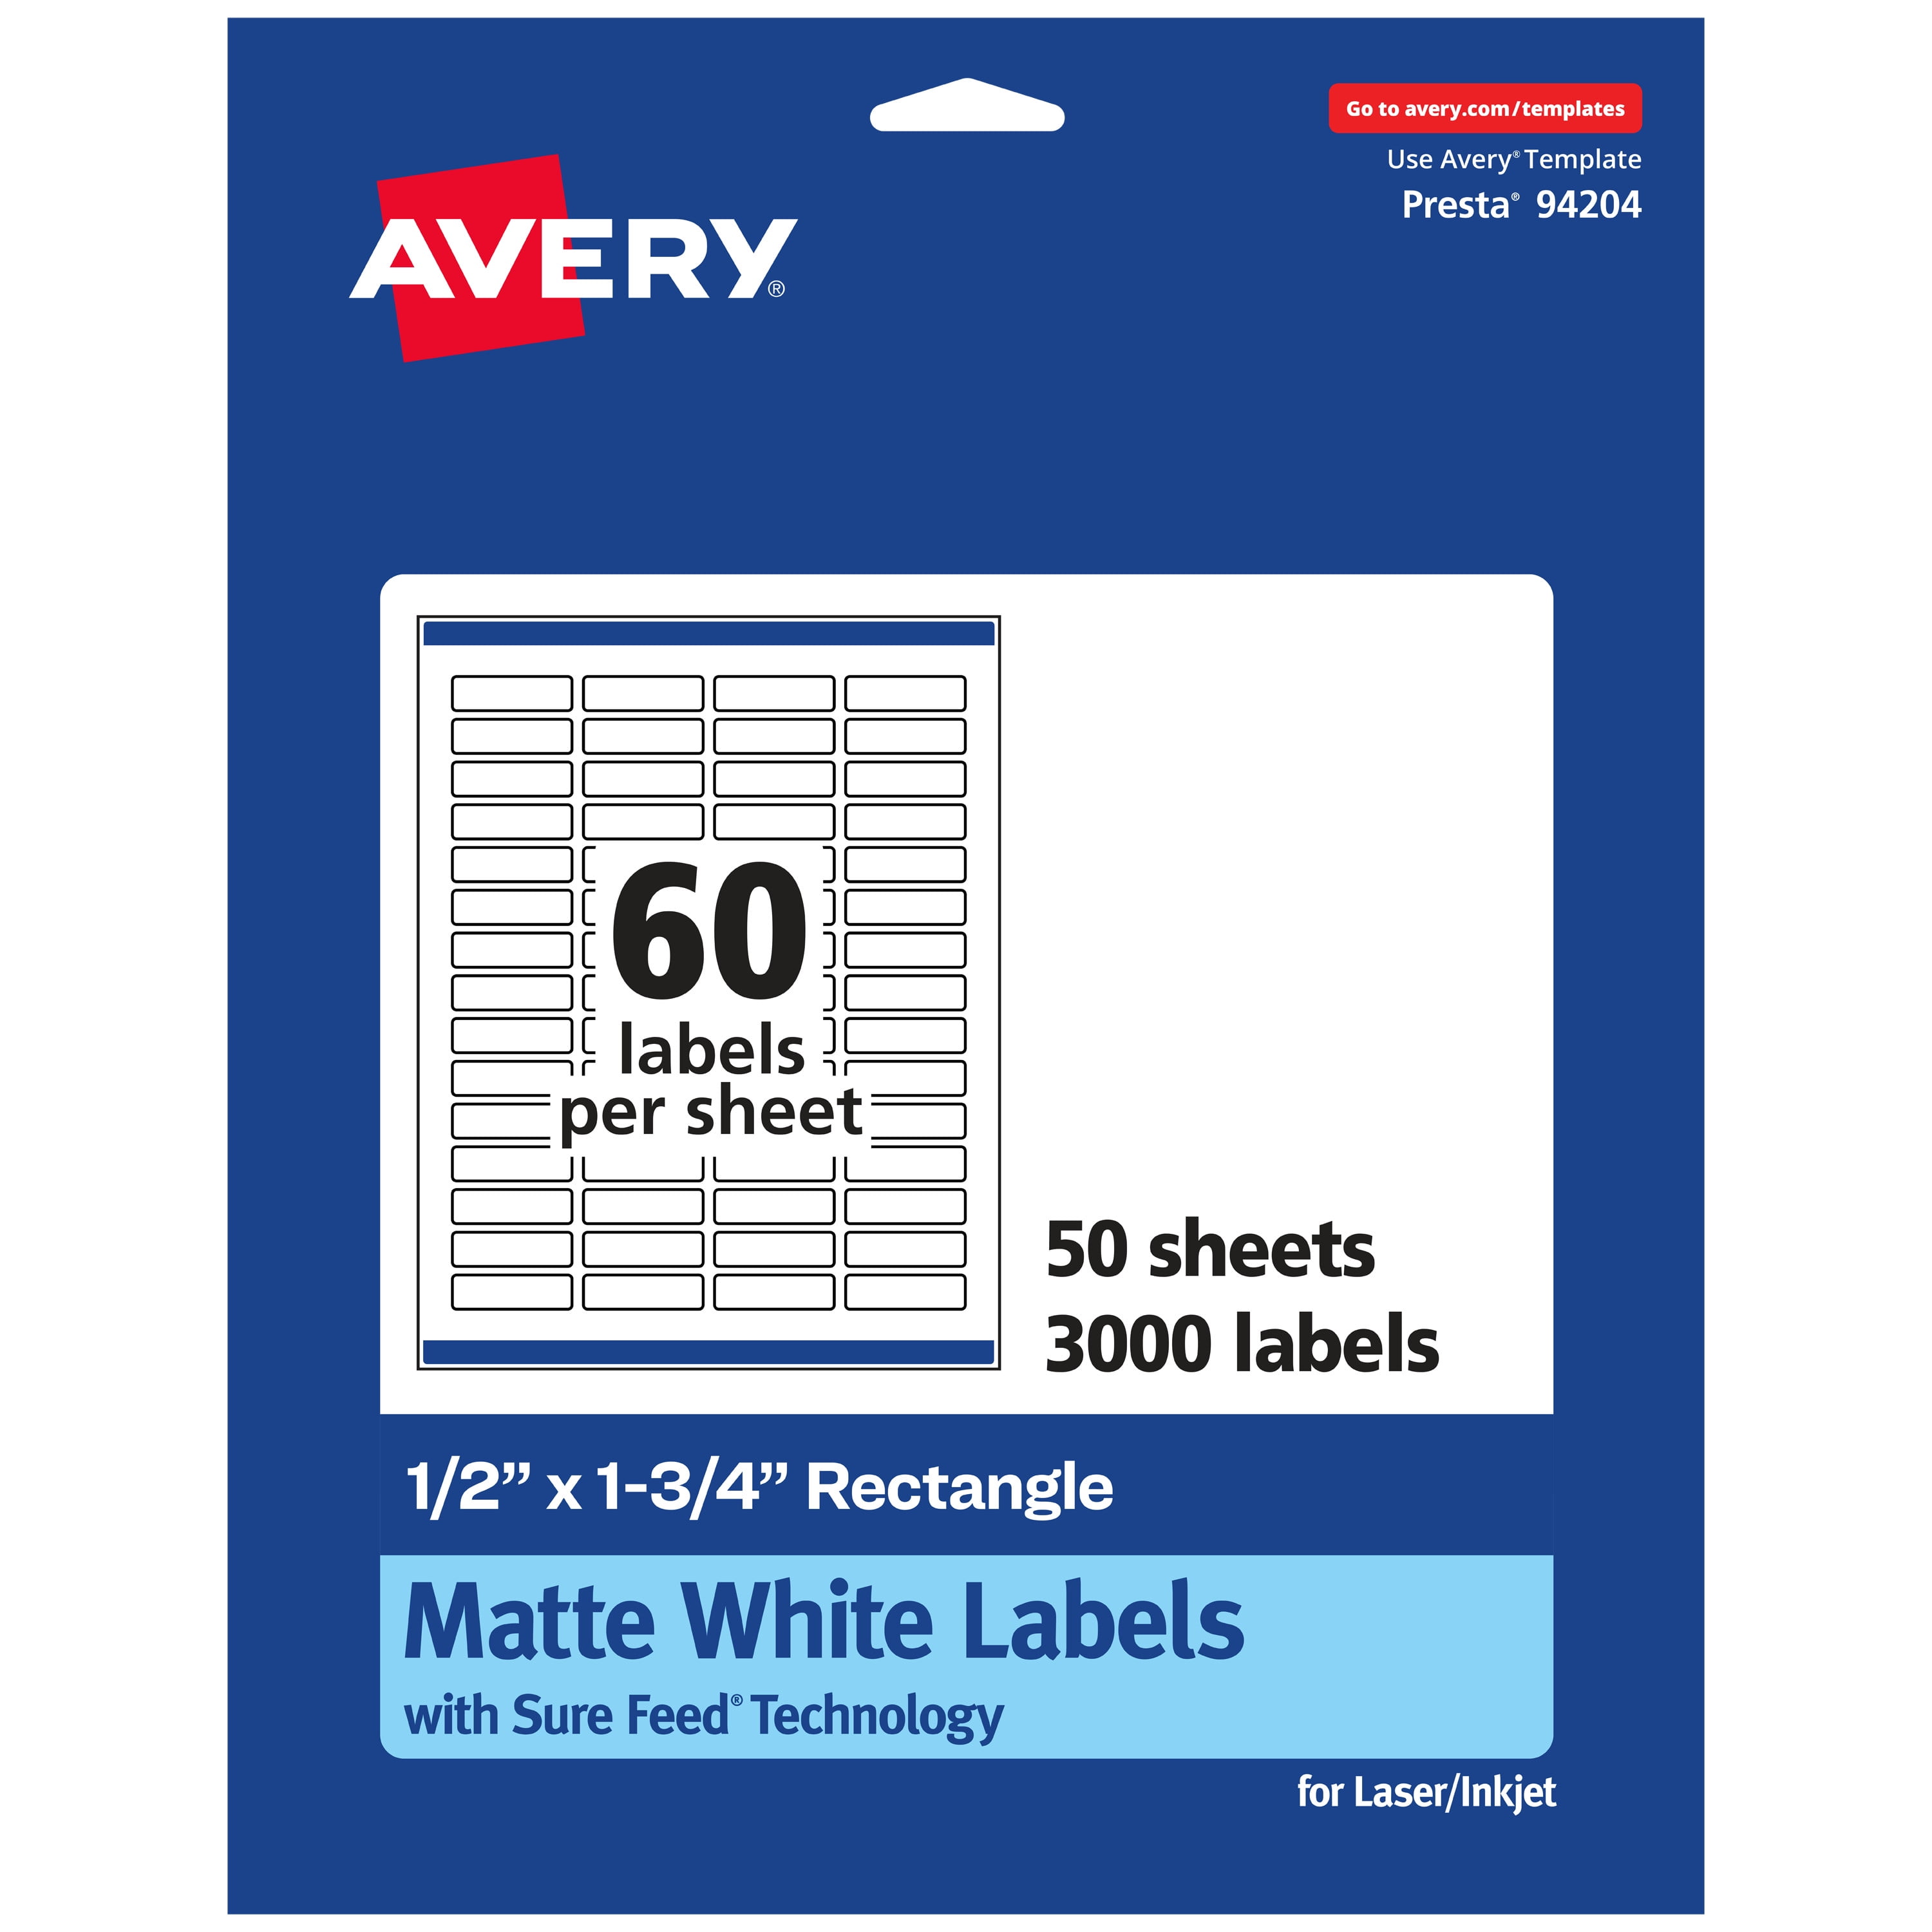 Staples Print Write Removable Labels 1/2 X 1.75 840 5125 for sale online